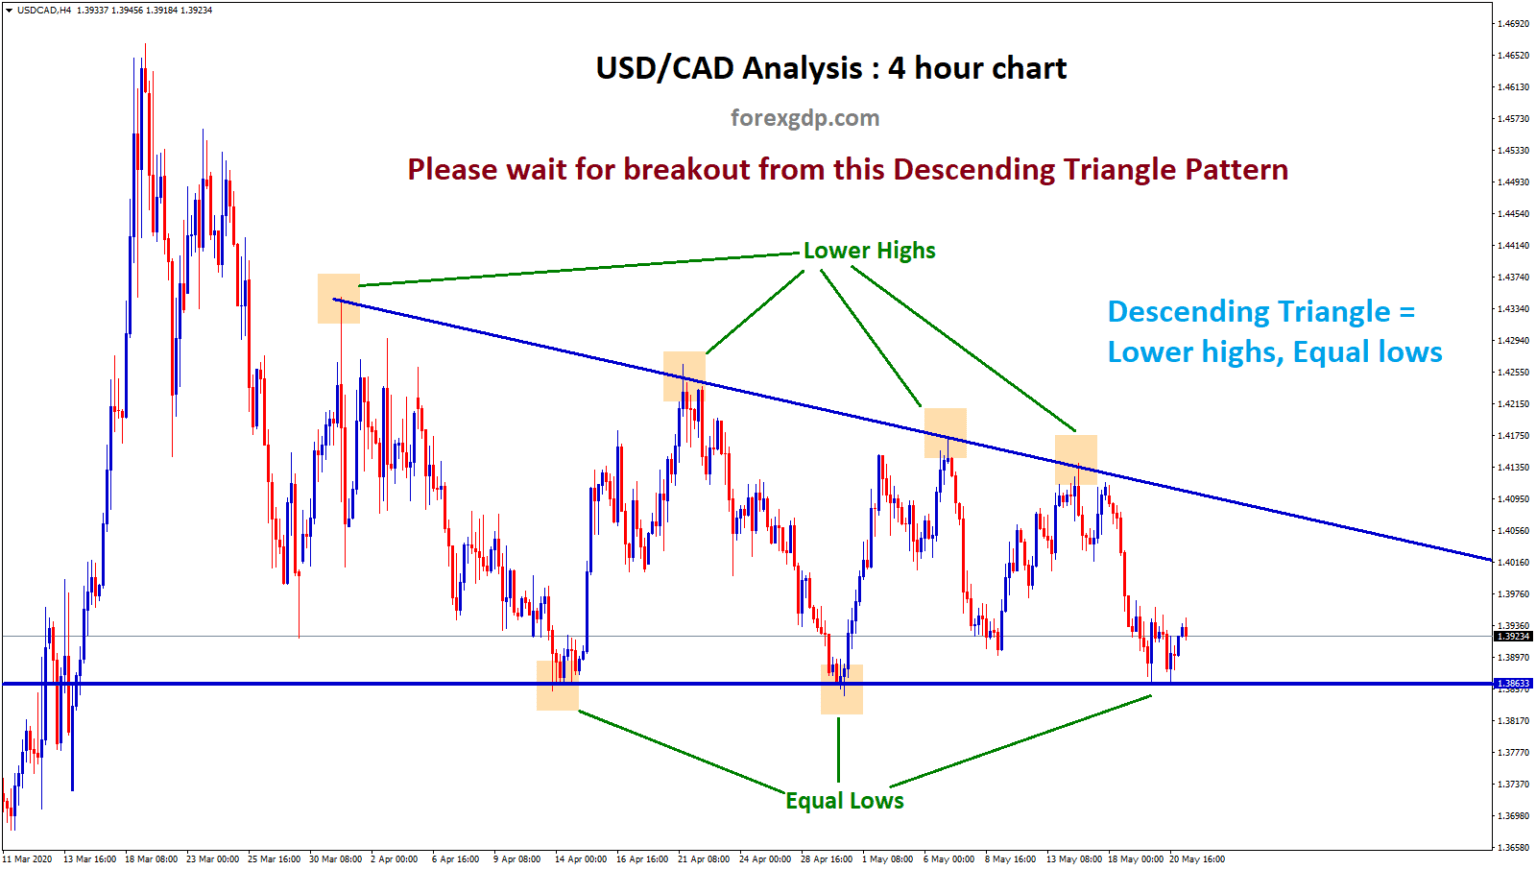 Descending Triangle pattern in USDCAD. Wait for breakout. FOREX GDP